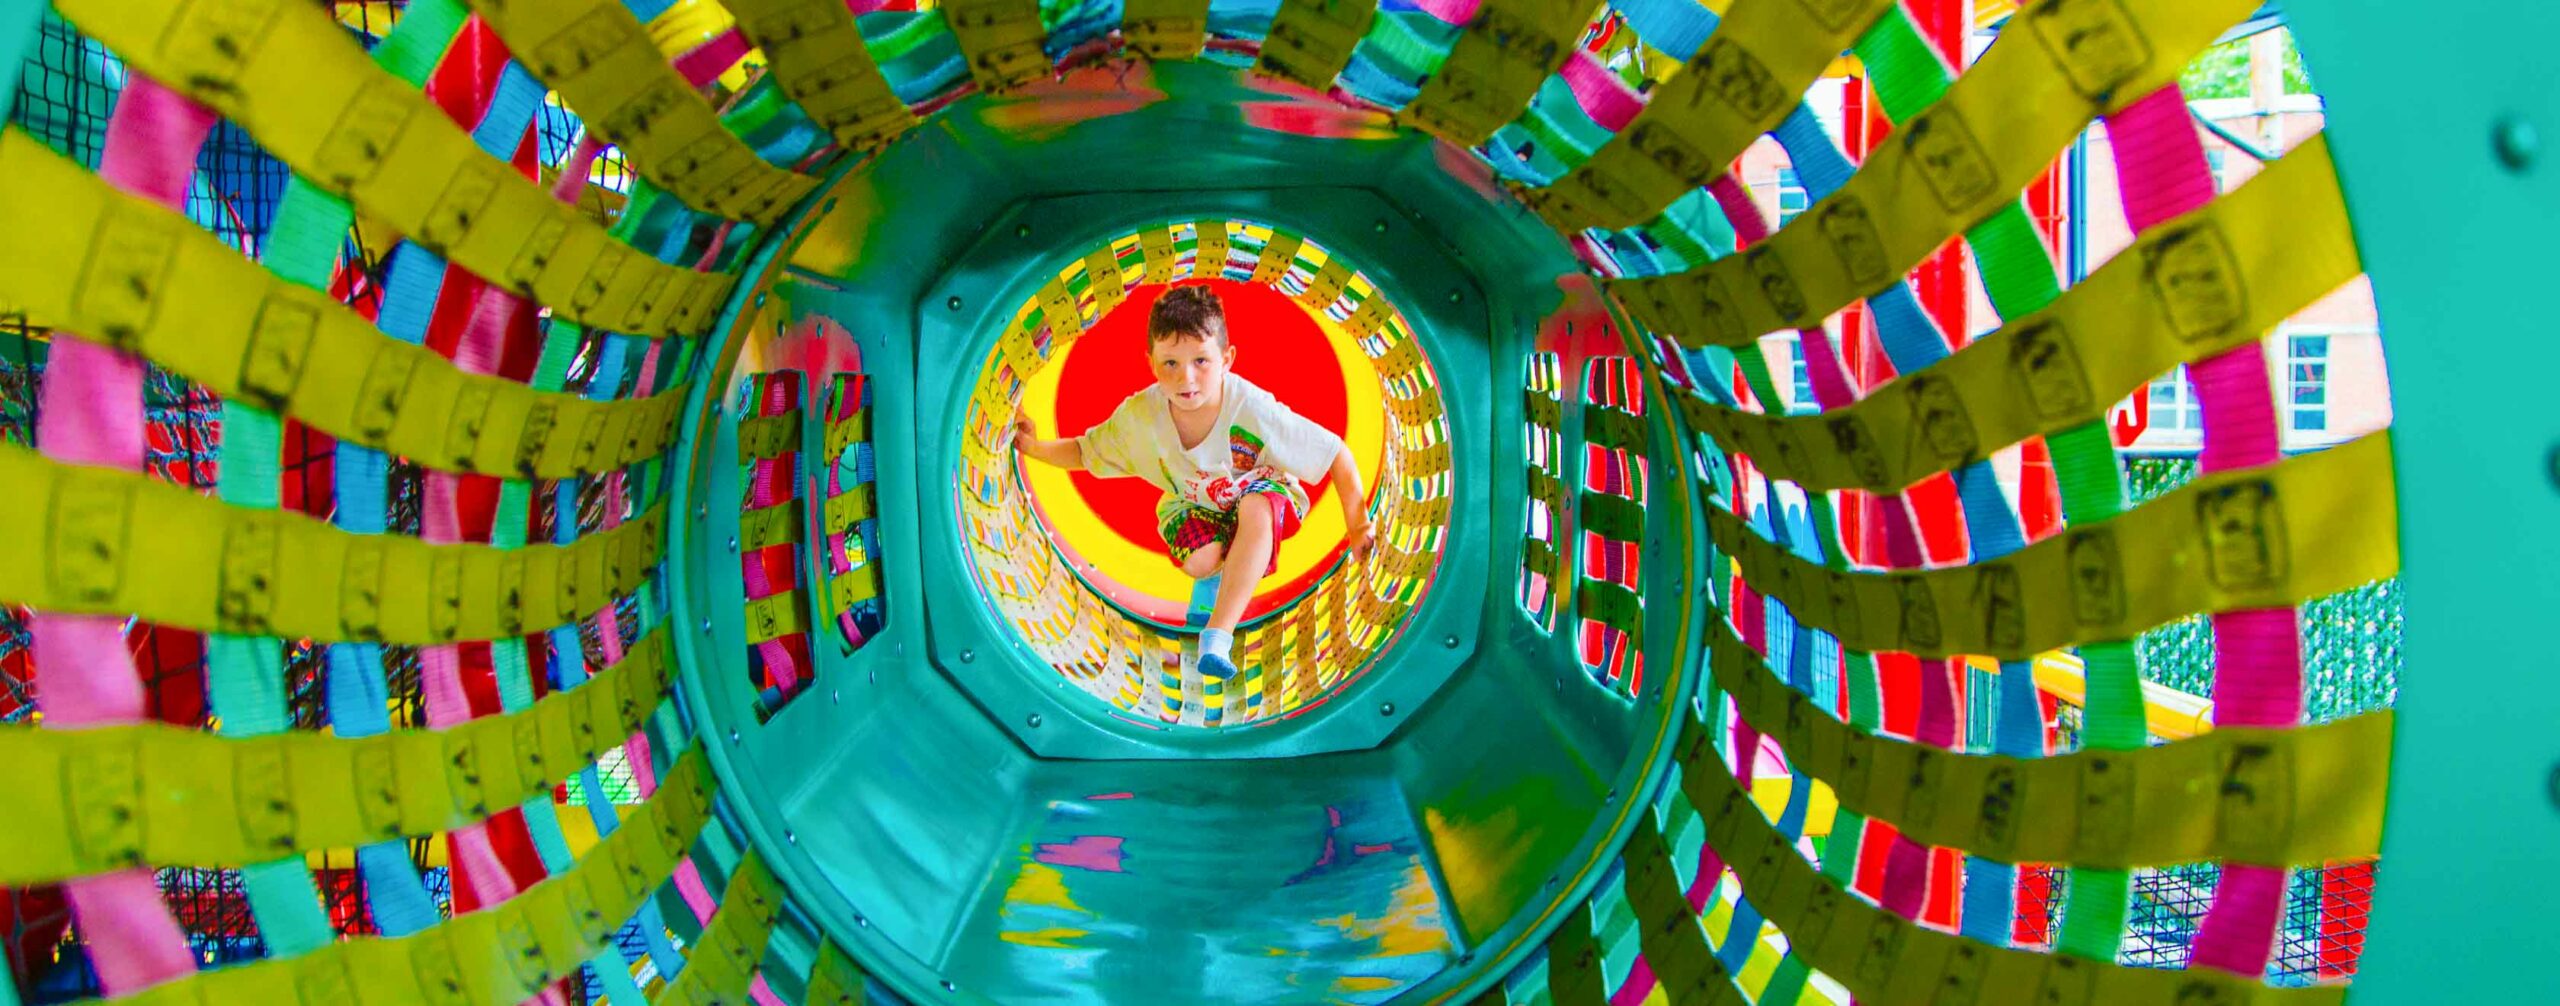 Boy climbs through colorful tunnel in play area